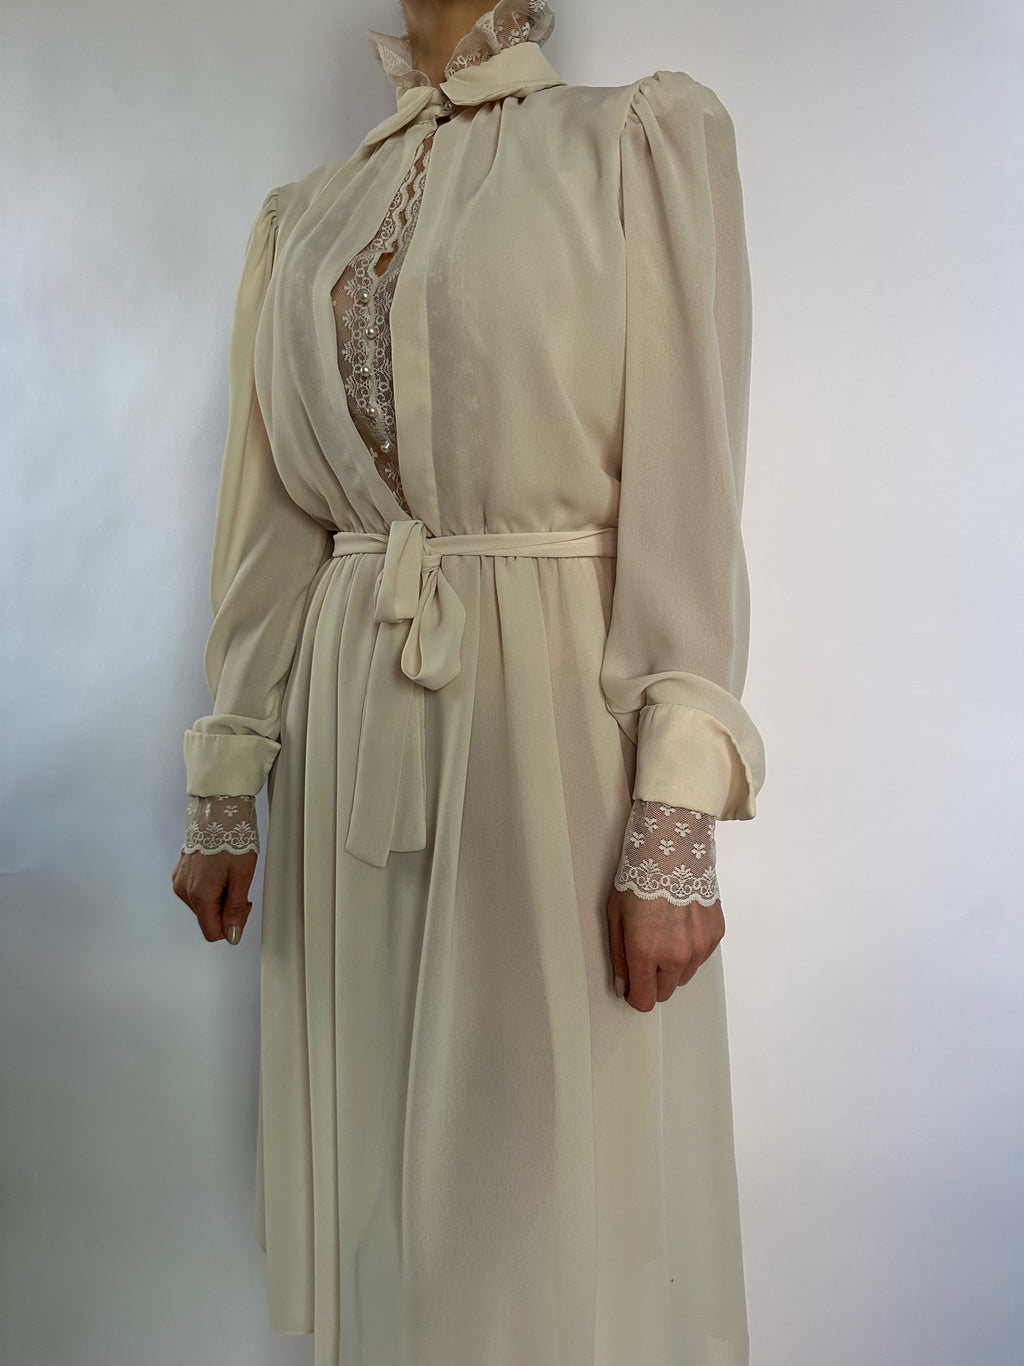 VINTAGE IVORY LONG SLEEVE COLLAR DRESS WITH LACE DETAIL - SIZE M